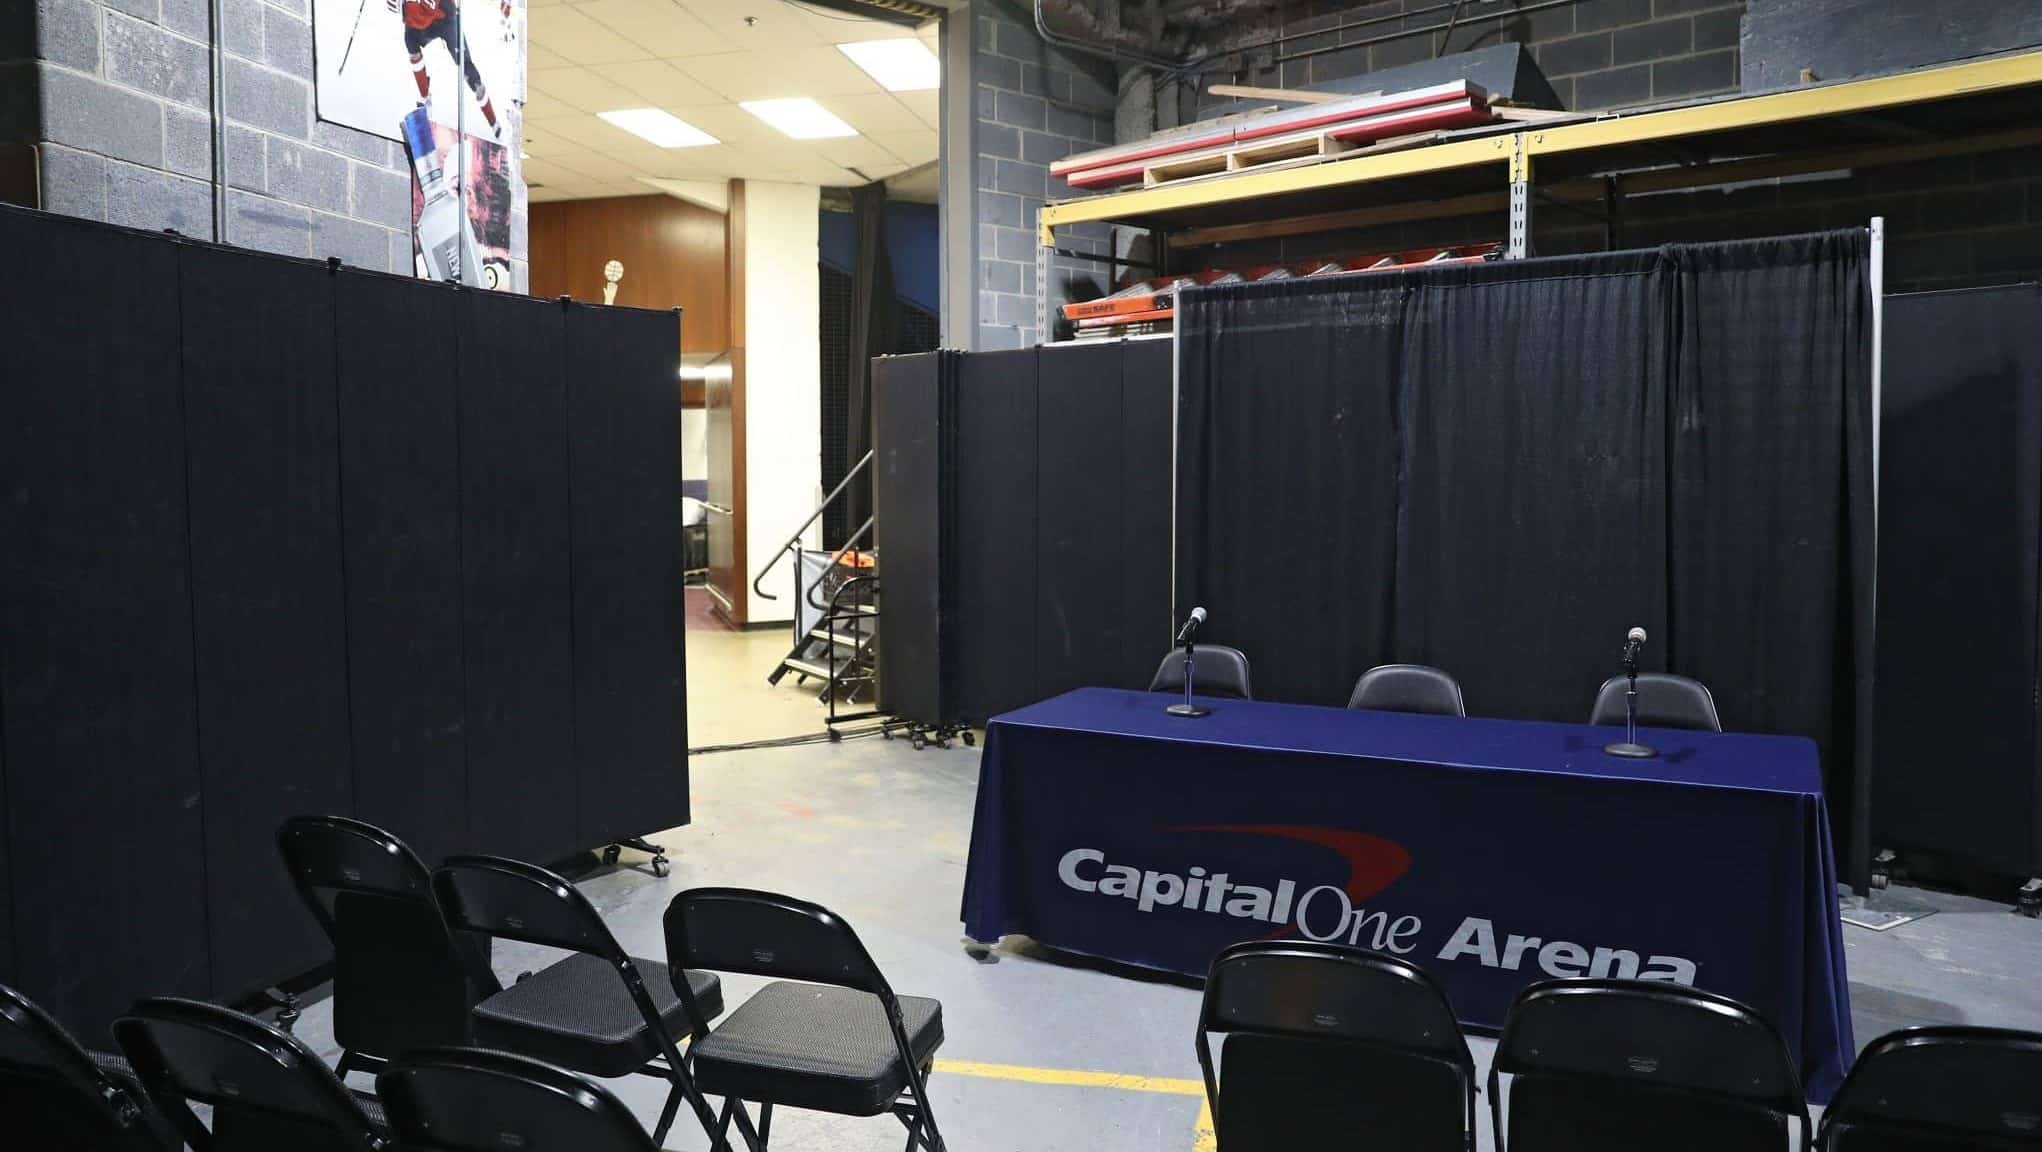 WASHINGTON, DC - MARCH 10: A general view of a new post-game interview area prior to the New York Knicks playing the Washington Wizards at Capital One Arena on March 10, 2020 in Washington, DC. According to the NBA, the league has banned nonessential team personnel from the locker room, including media, because of the coronavirus. NOTE TO USER: User expressly acknowledges and agrees that, by downloading and or using this photograph, User is consenting to the terms and conditions of the Getty Images License Agreement.